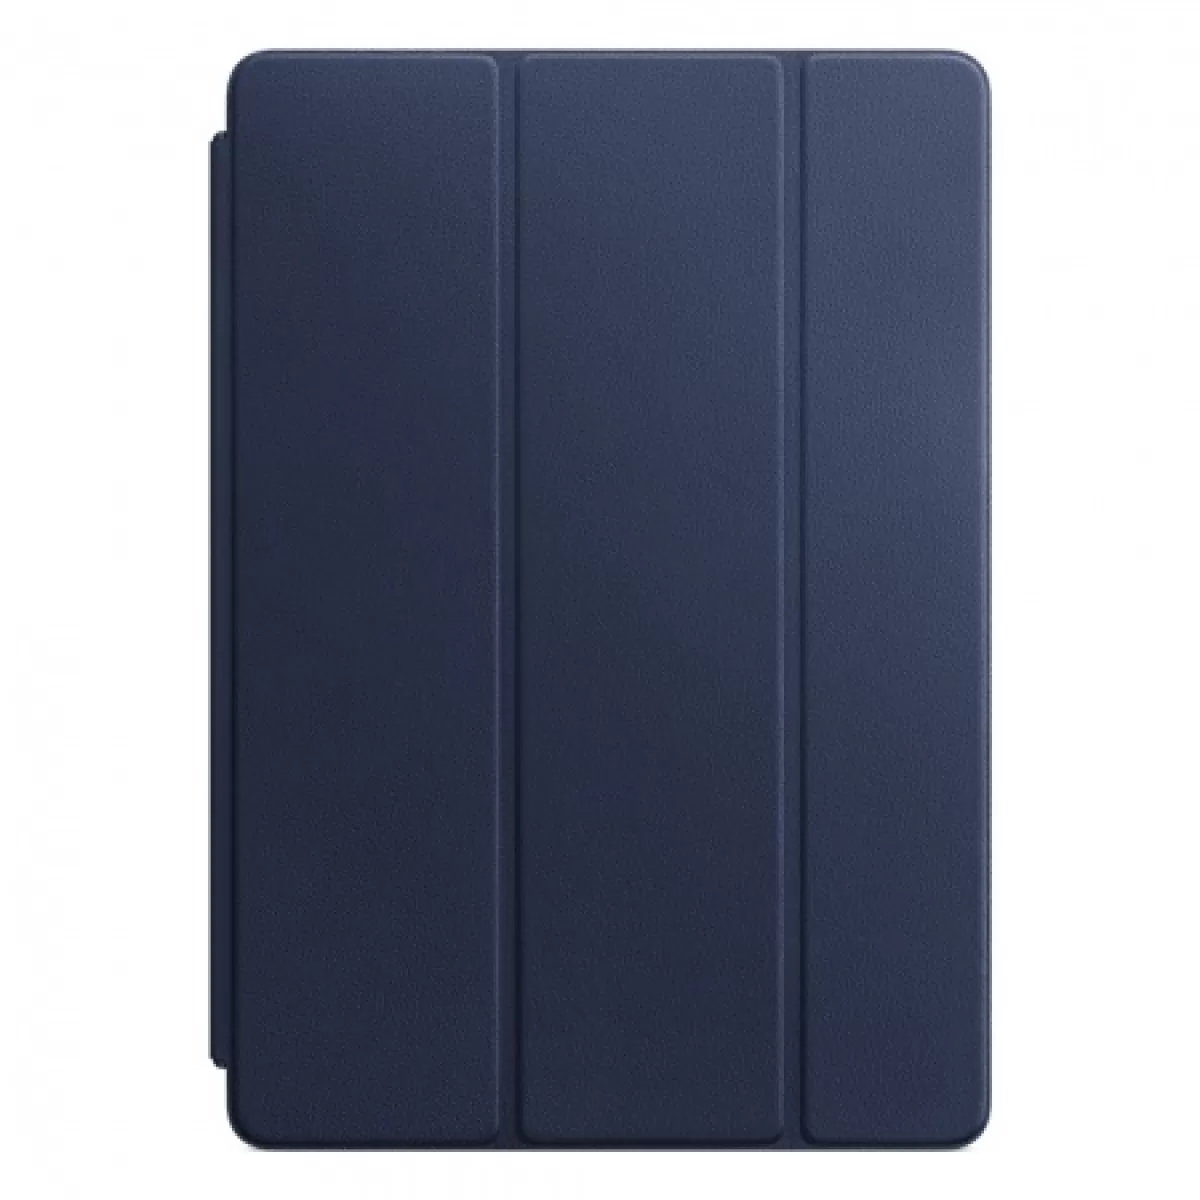 Apple Leather Smart Cover for 10.5inch iPad Pro Midnight Blue